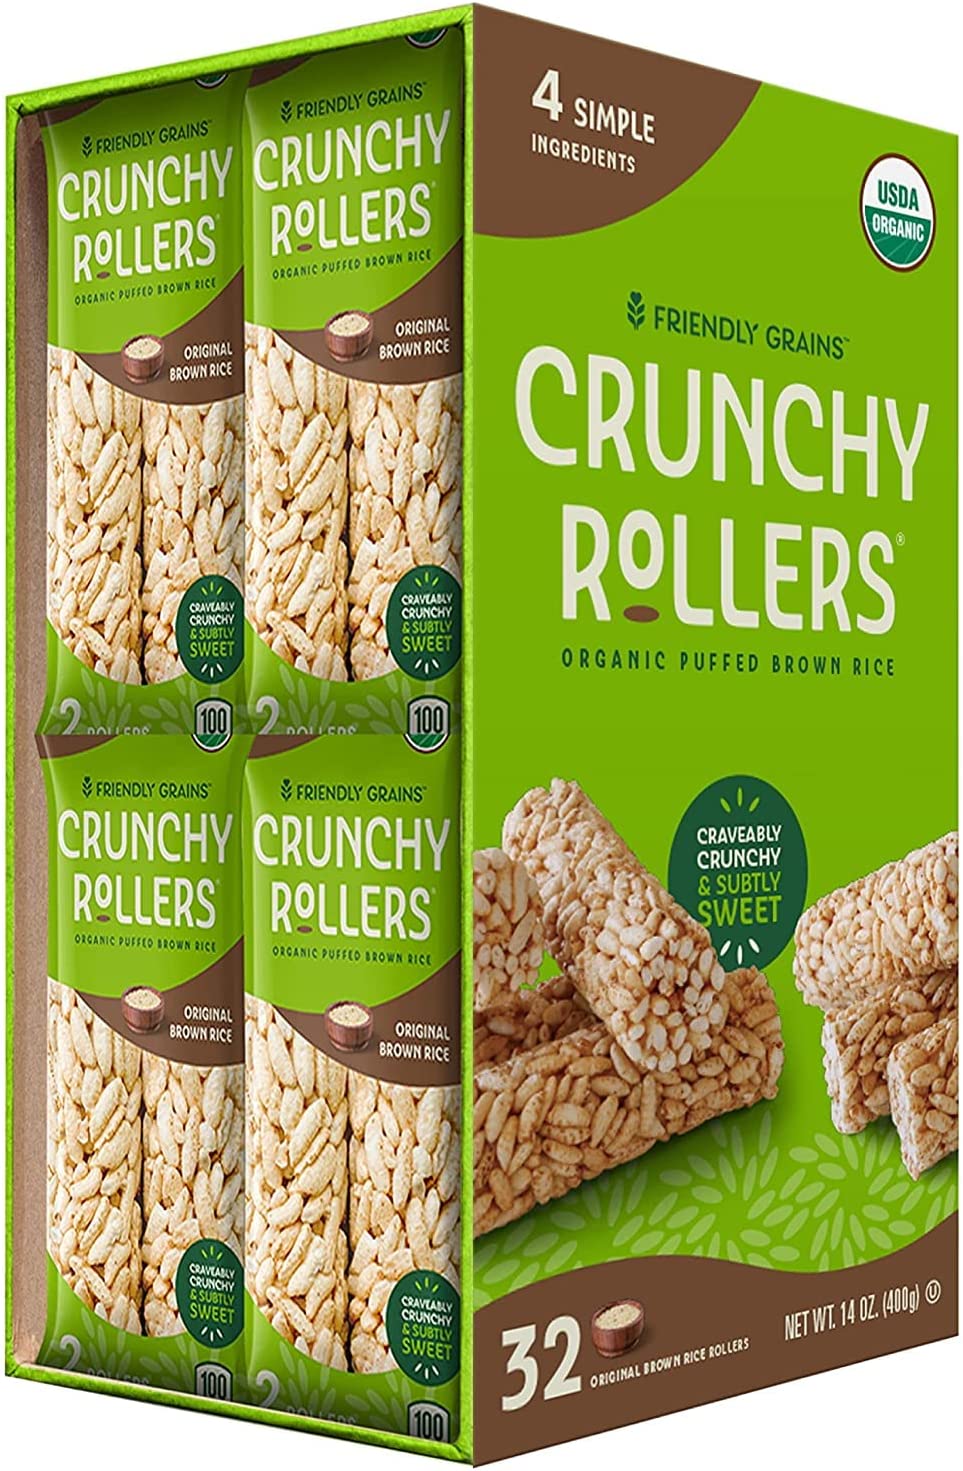 Friendly Grains – Crunchy Rollers – Organic Rice Snacks, Crispy Puffed Rice Rolls, Healthy Snack Rolls for Adults and Kids – Original Brown Rice (16 packs of 2)